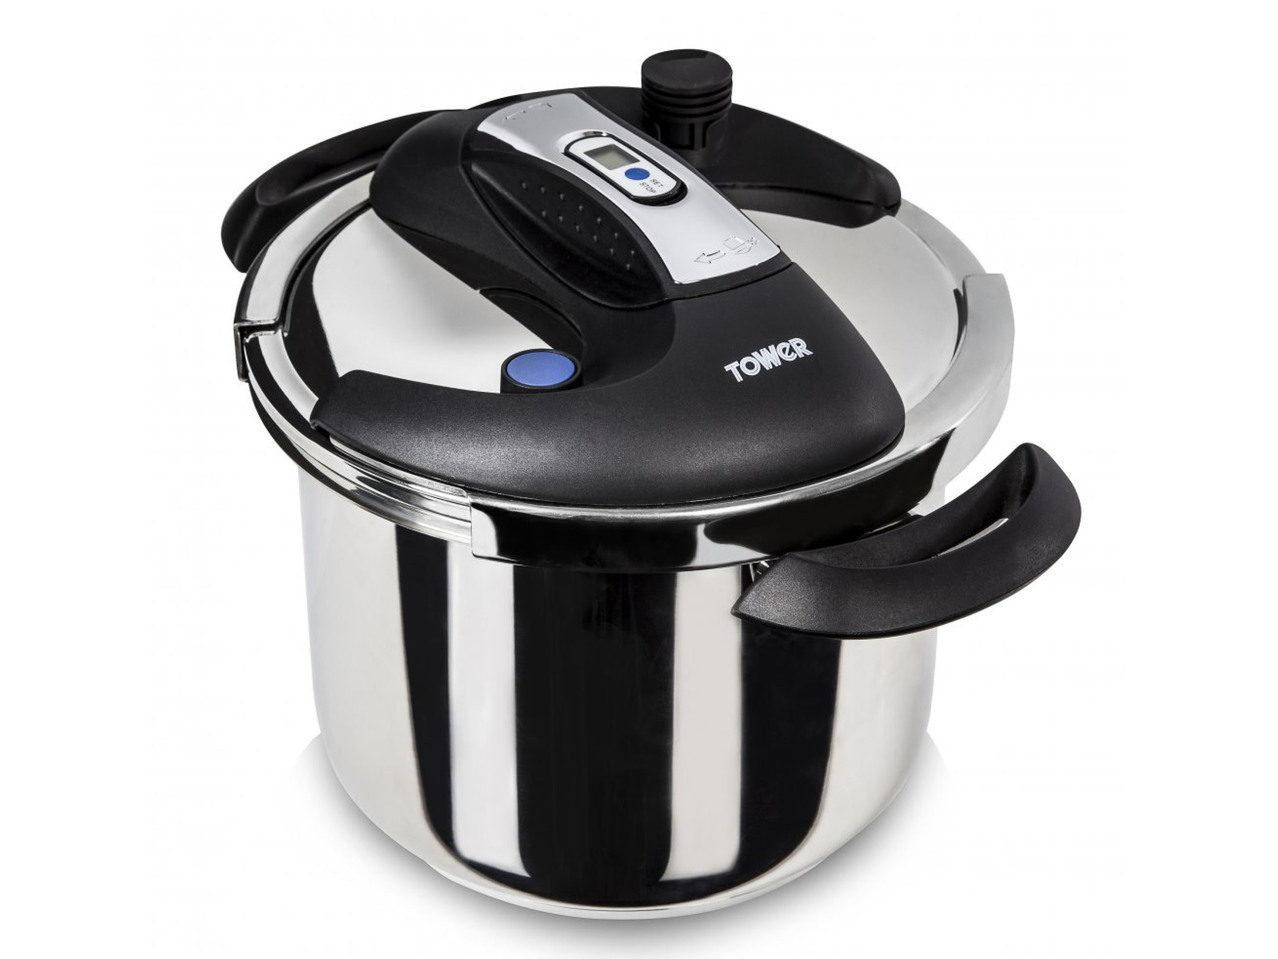 TOWER T90103 Pro One Touch Pressure Cooker 6L